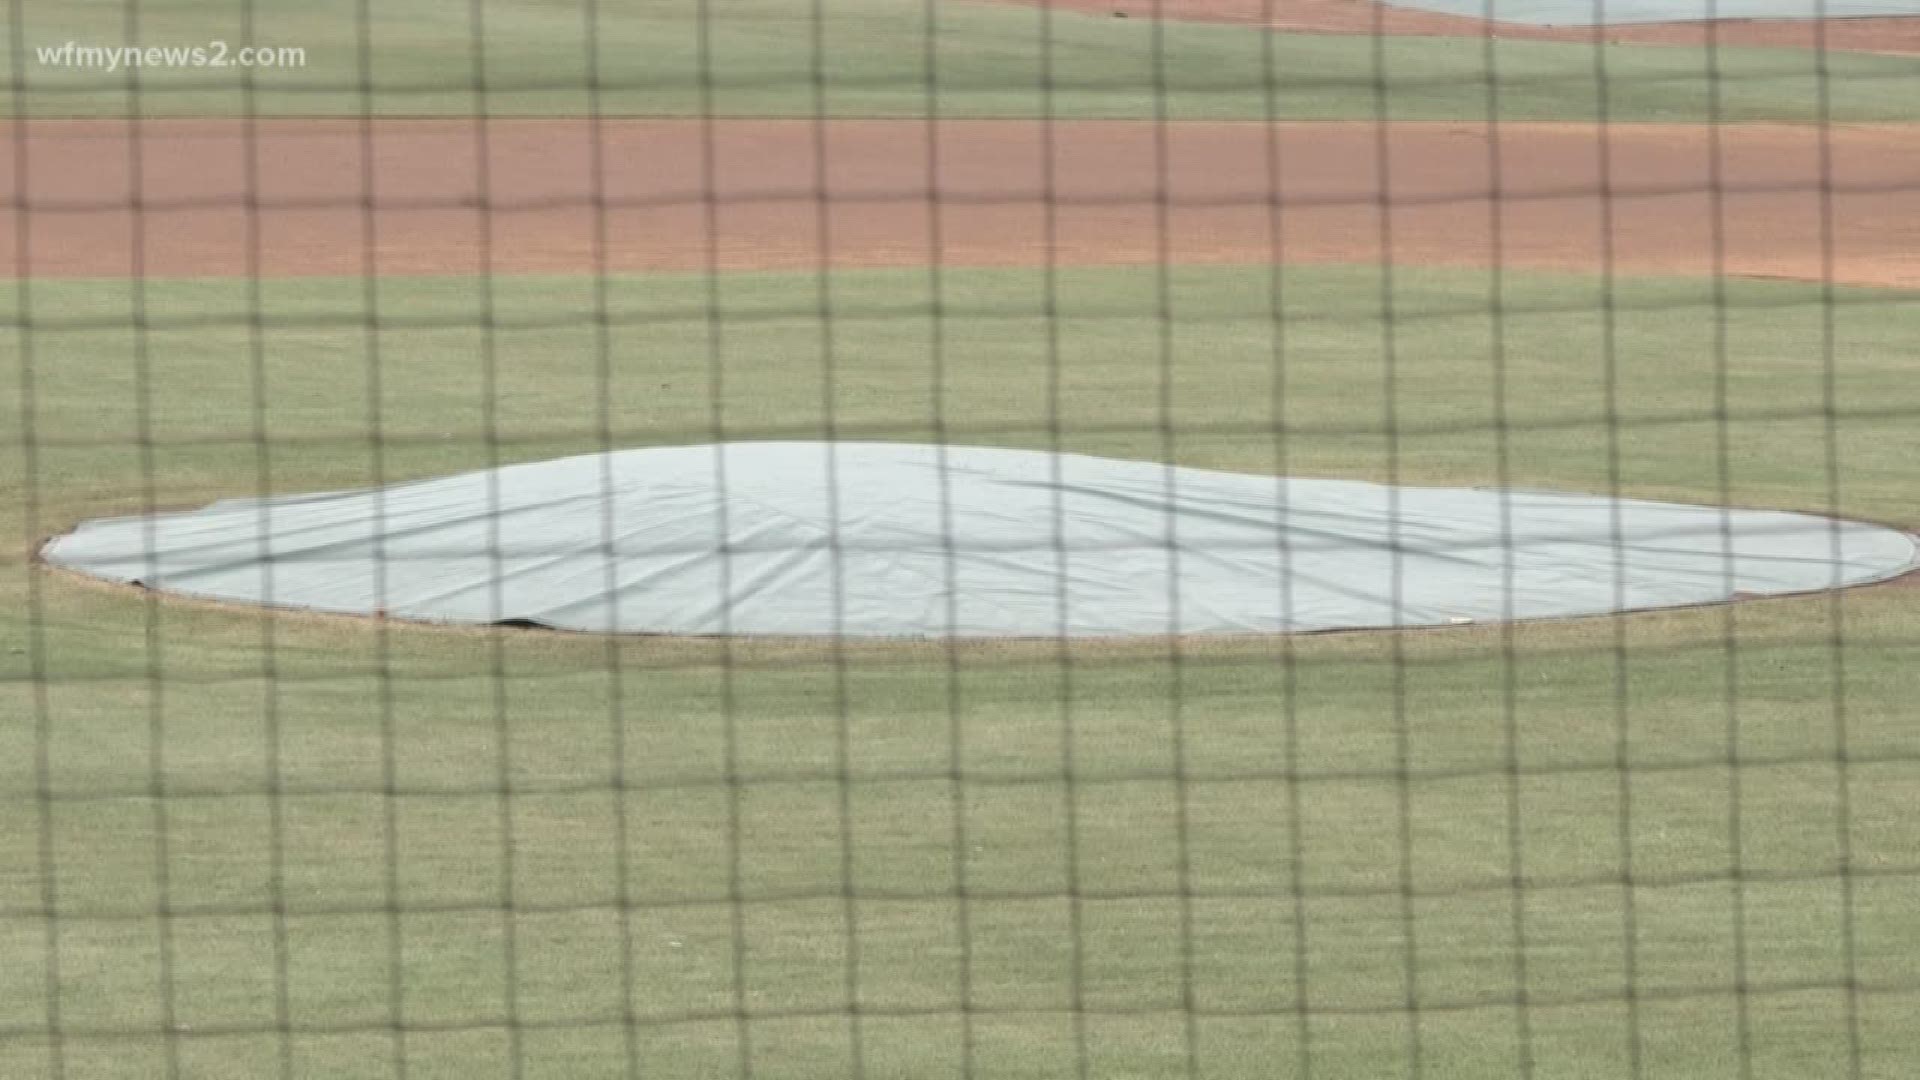 The protective netting was only behind home plate extending to the first and third-base sides.